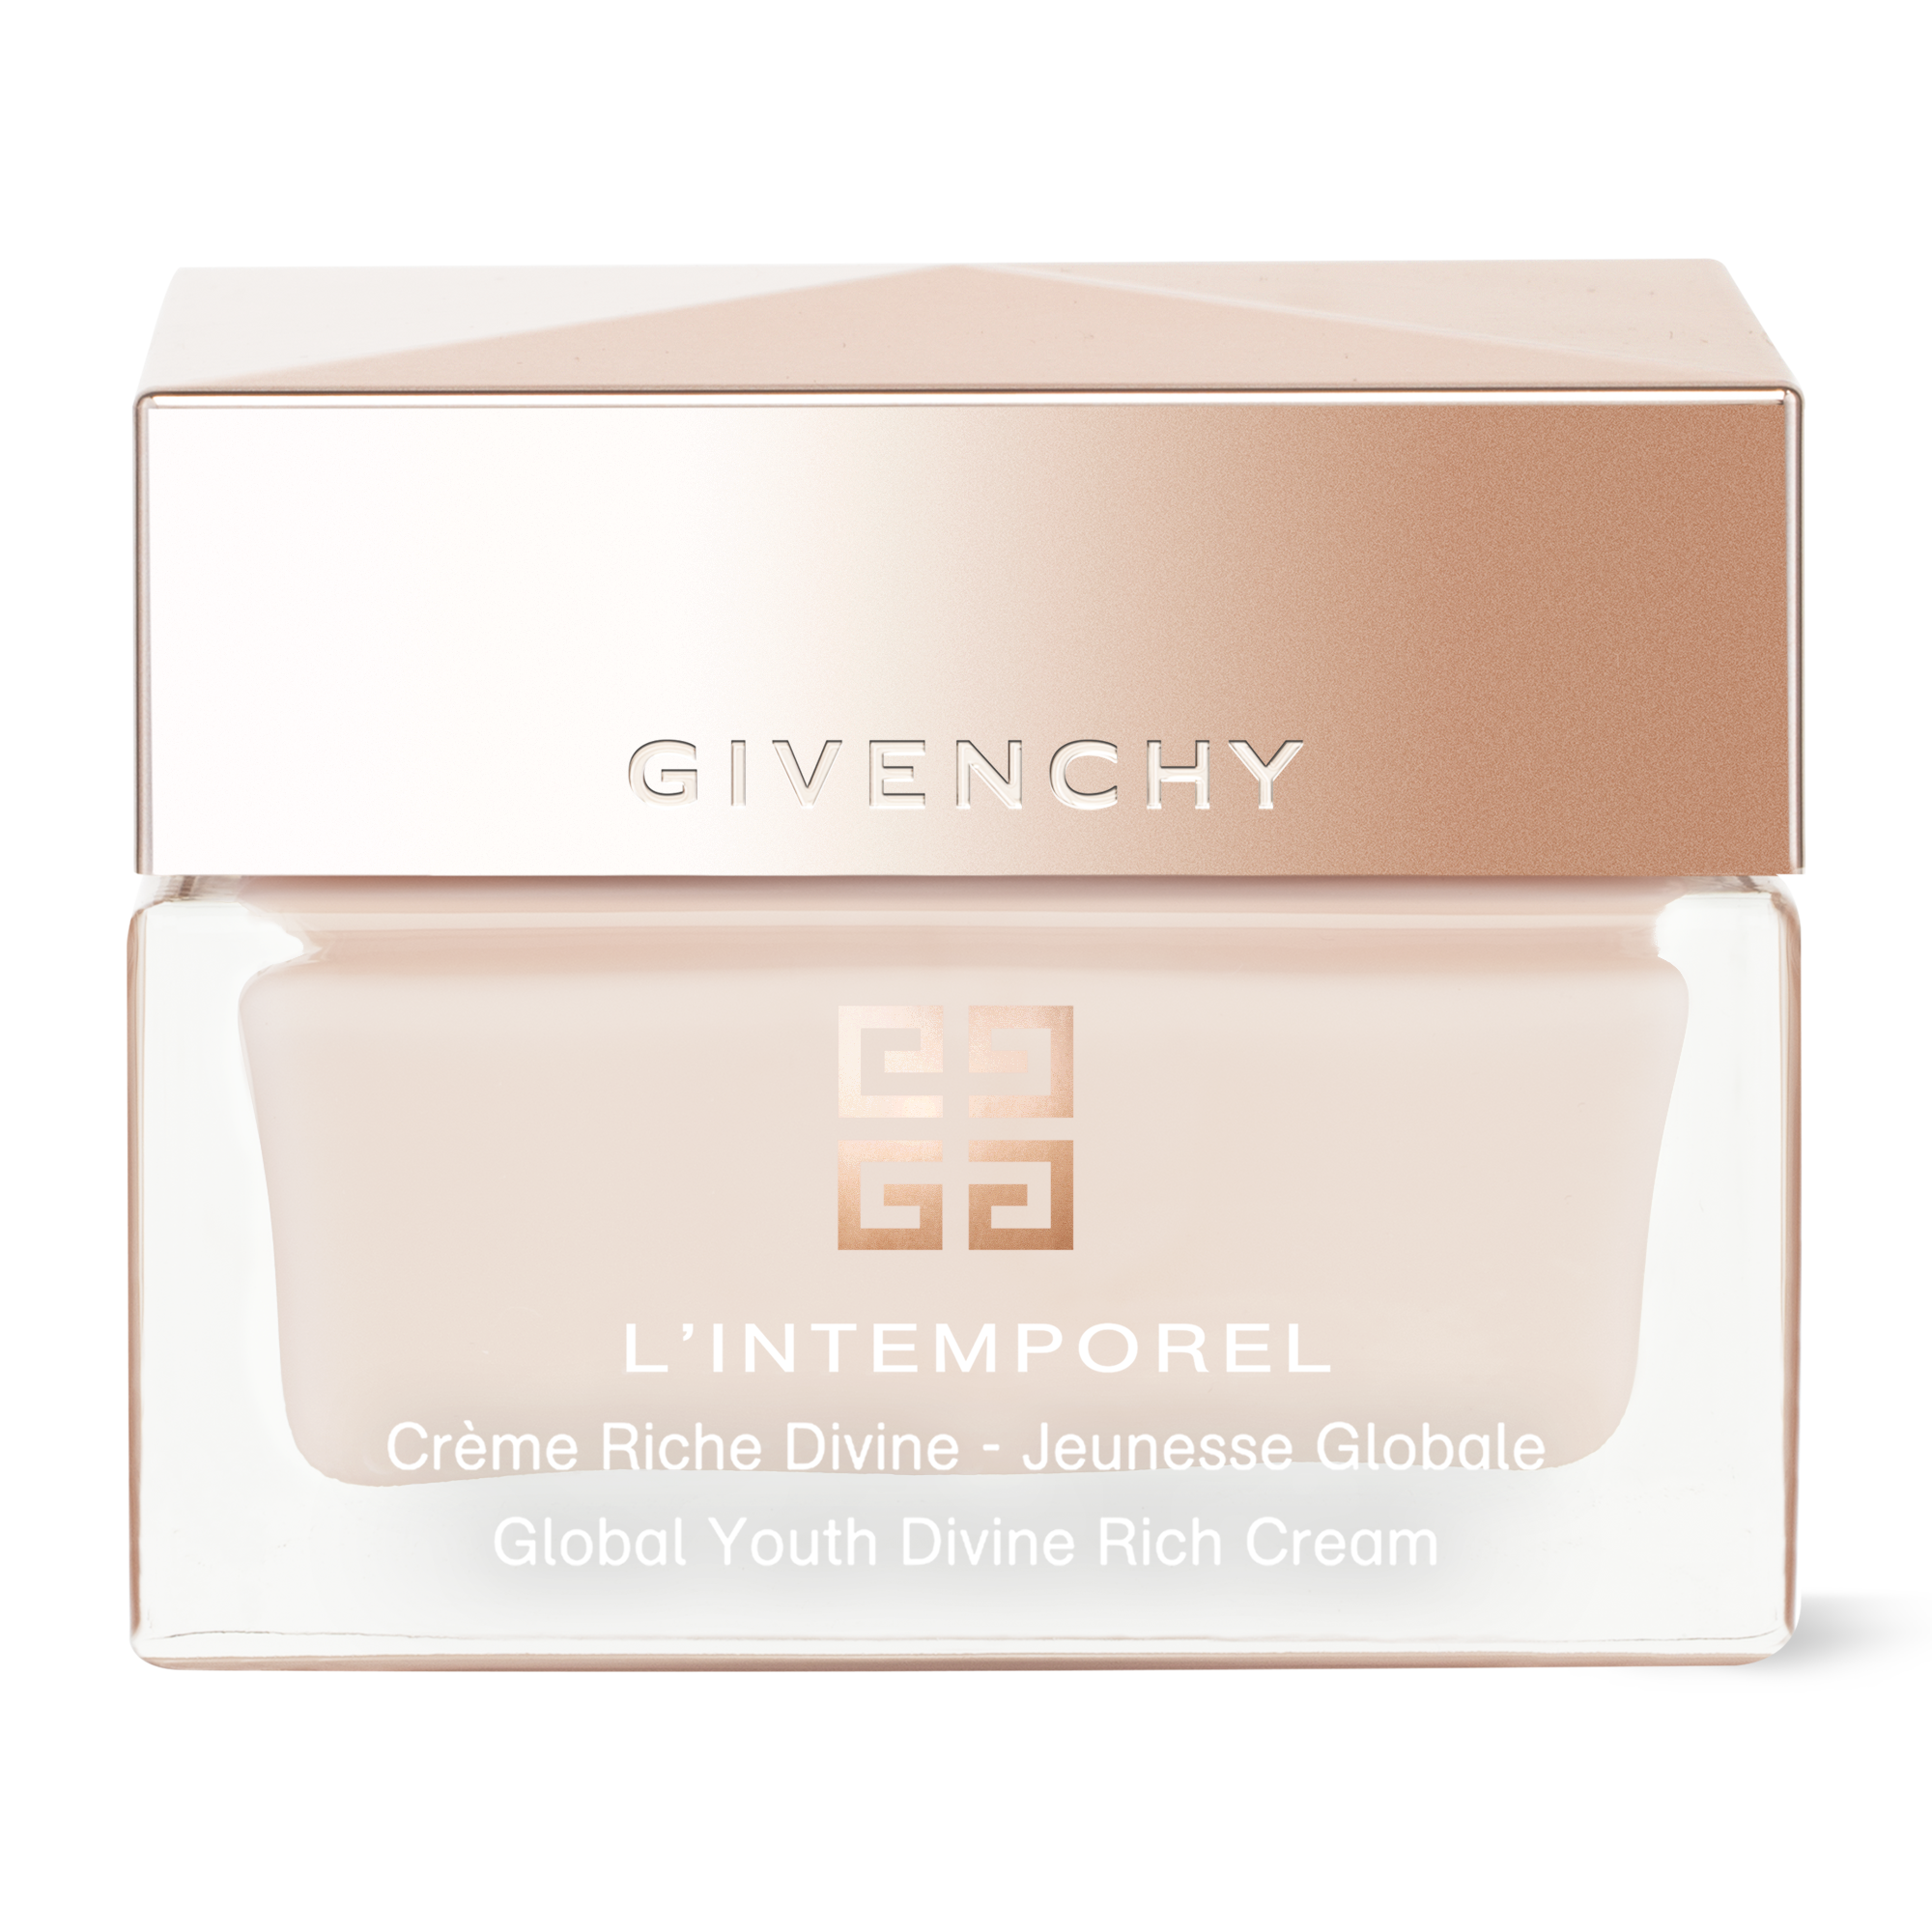 givenchy skin care products